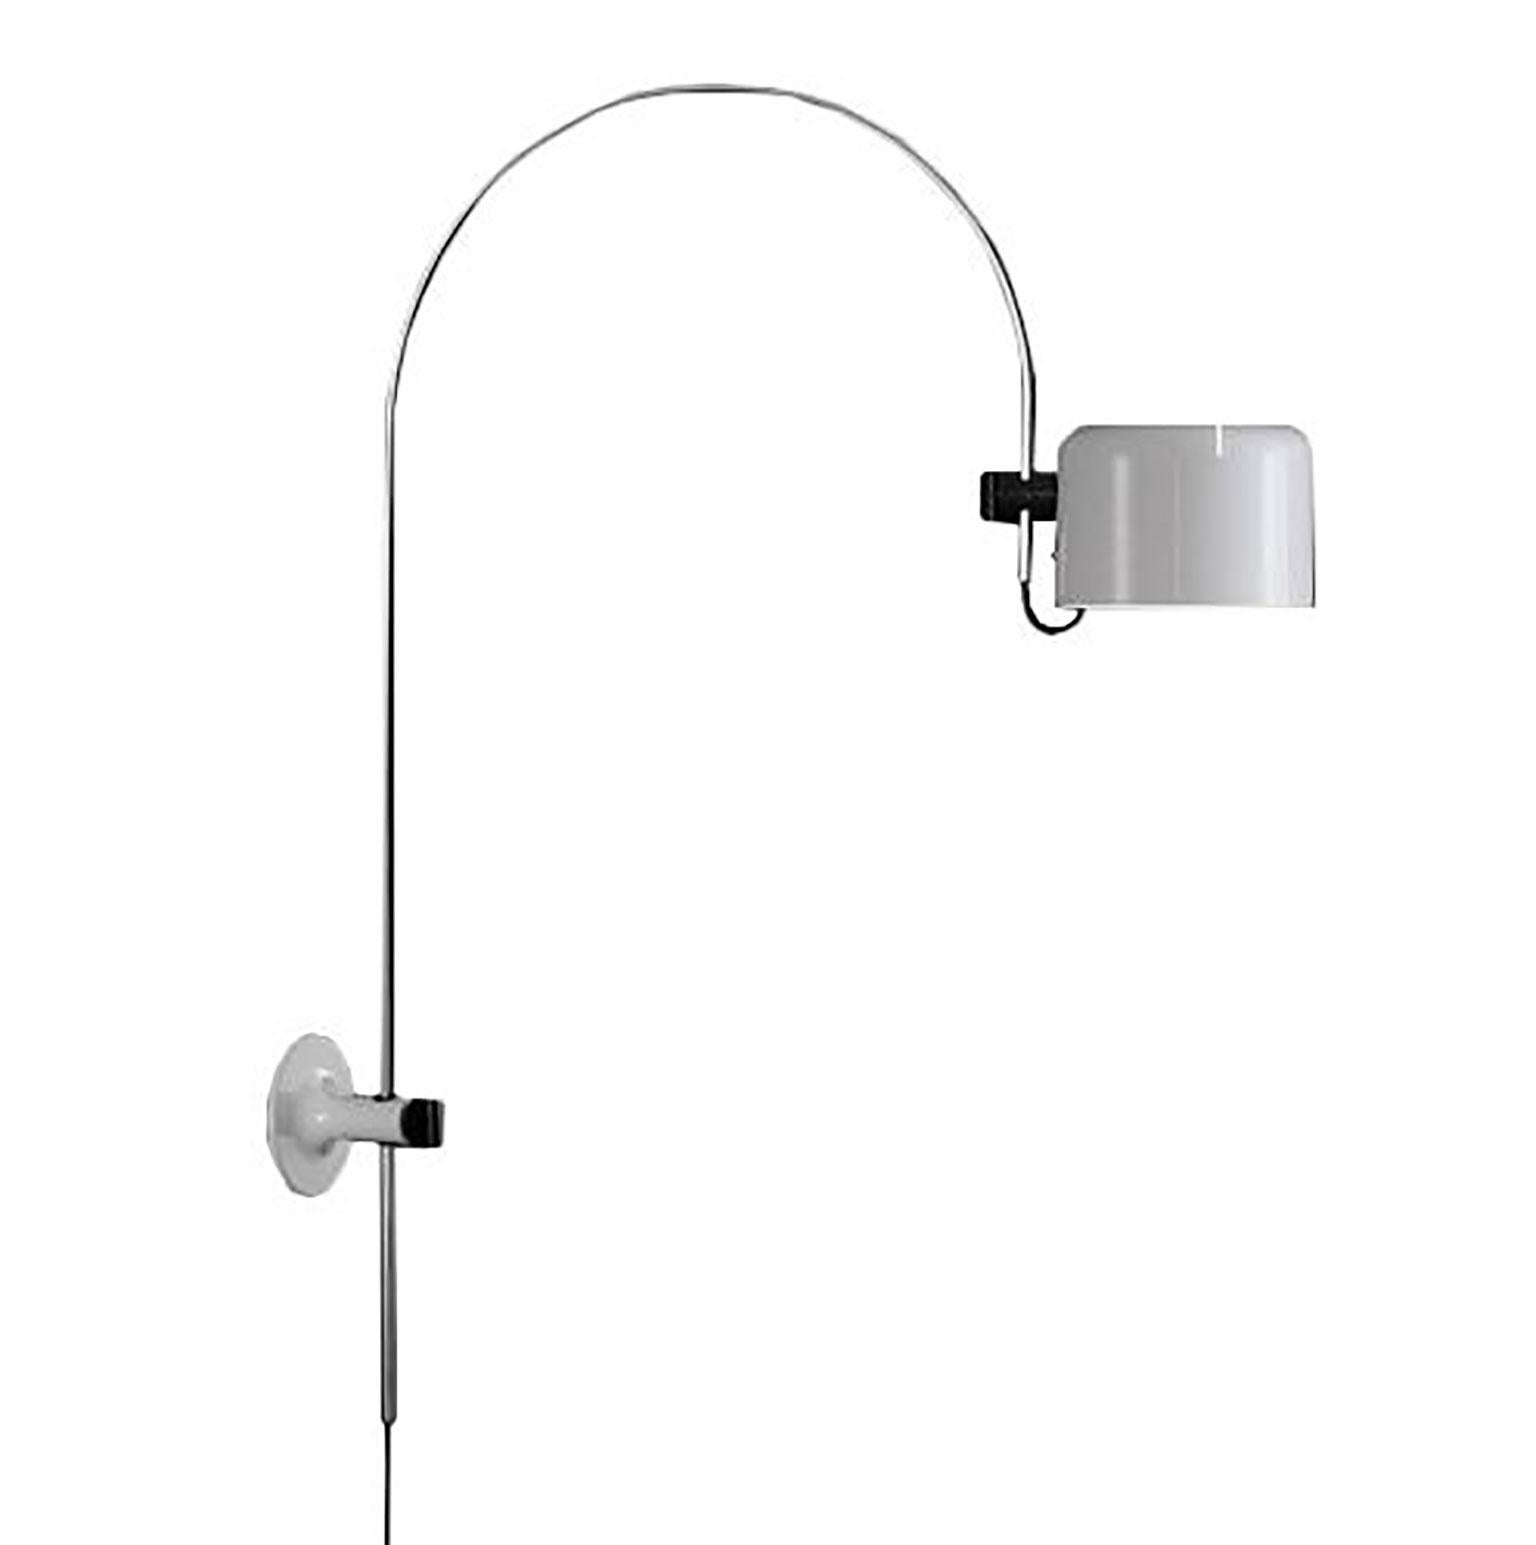 Coupe wall lamp (1158) designed by Joe Colombo for Oluce. Elegance defined by form following function is exemplified in this beautiful fixture. A round black plate is attached to the wall, into which the arm of the lamp is fixed. The arm is a long